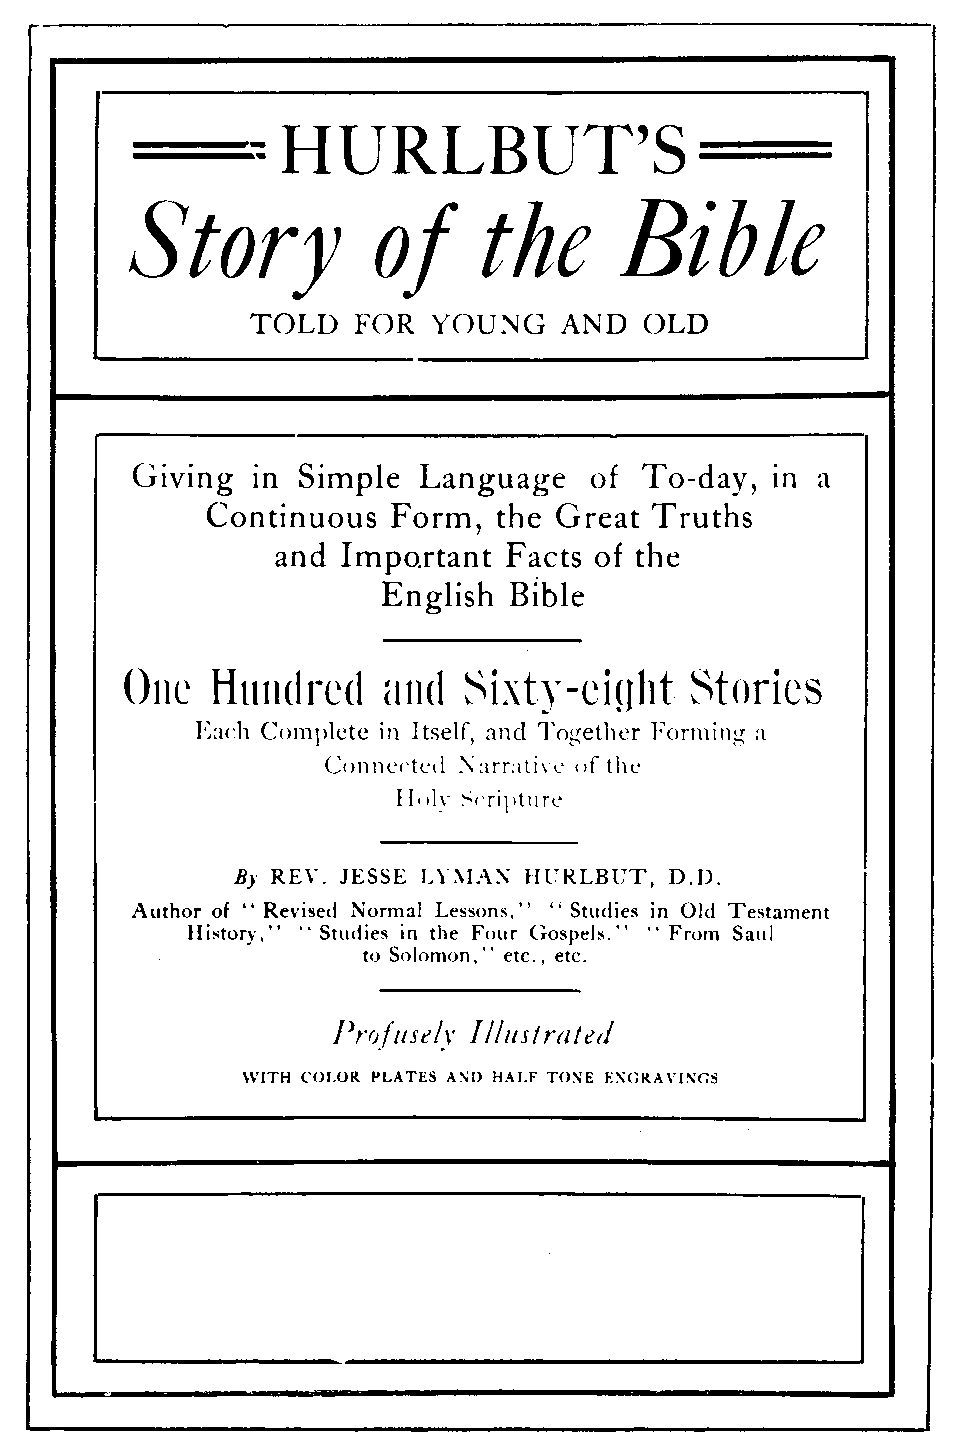 [Title Page] from The Story of the Bible by Jesse Hurlbut